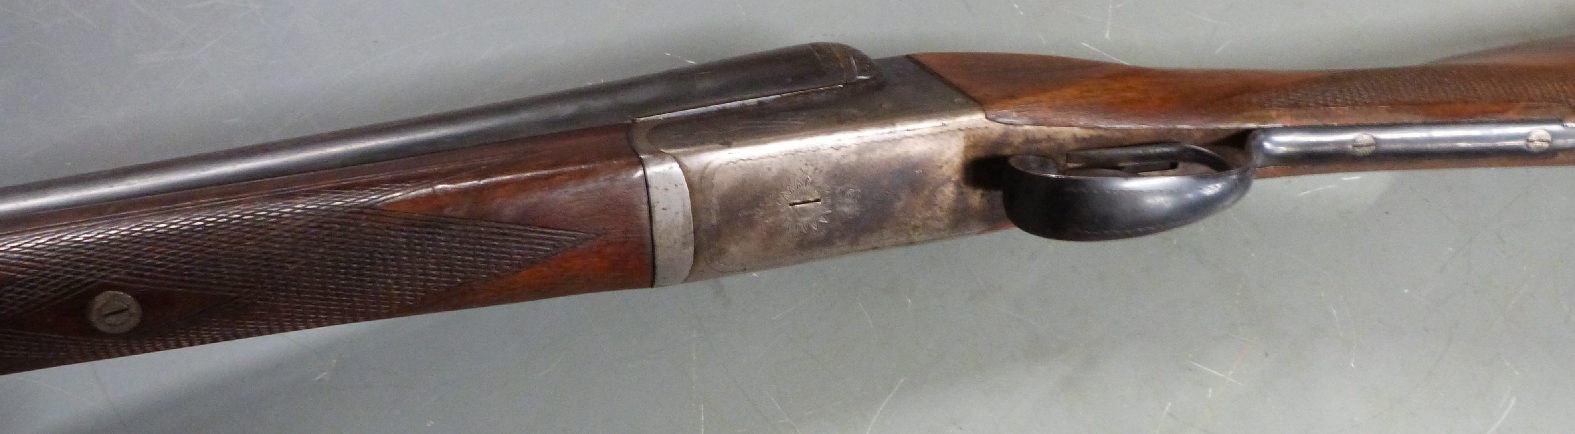 Essex 12 bore side by side shotgun with engraved locks, trigger guard underside and top plate, - Image 6 of 7